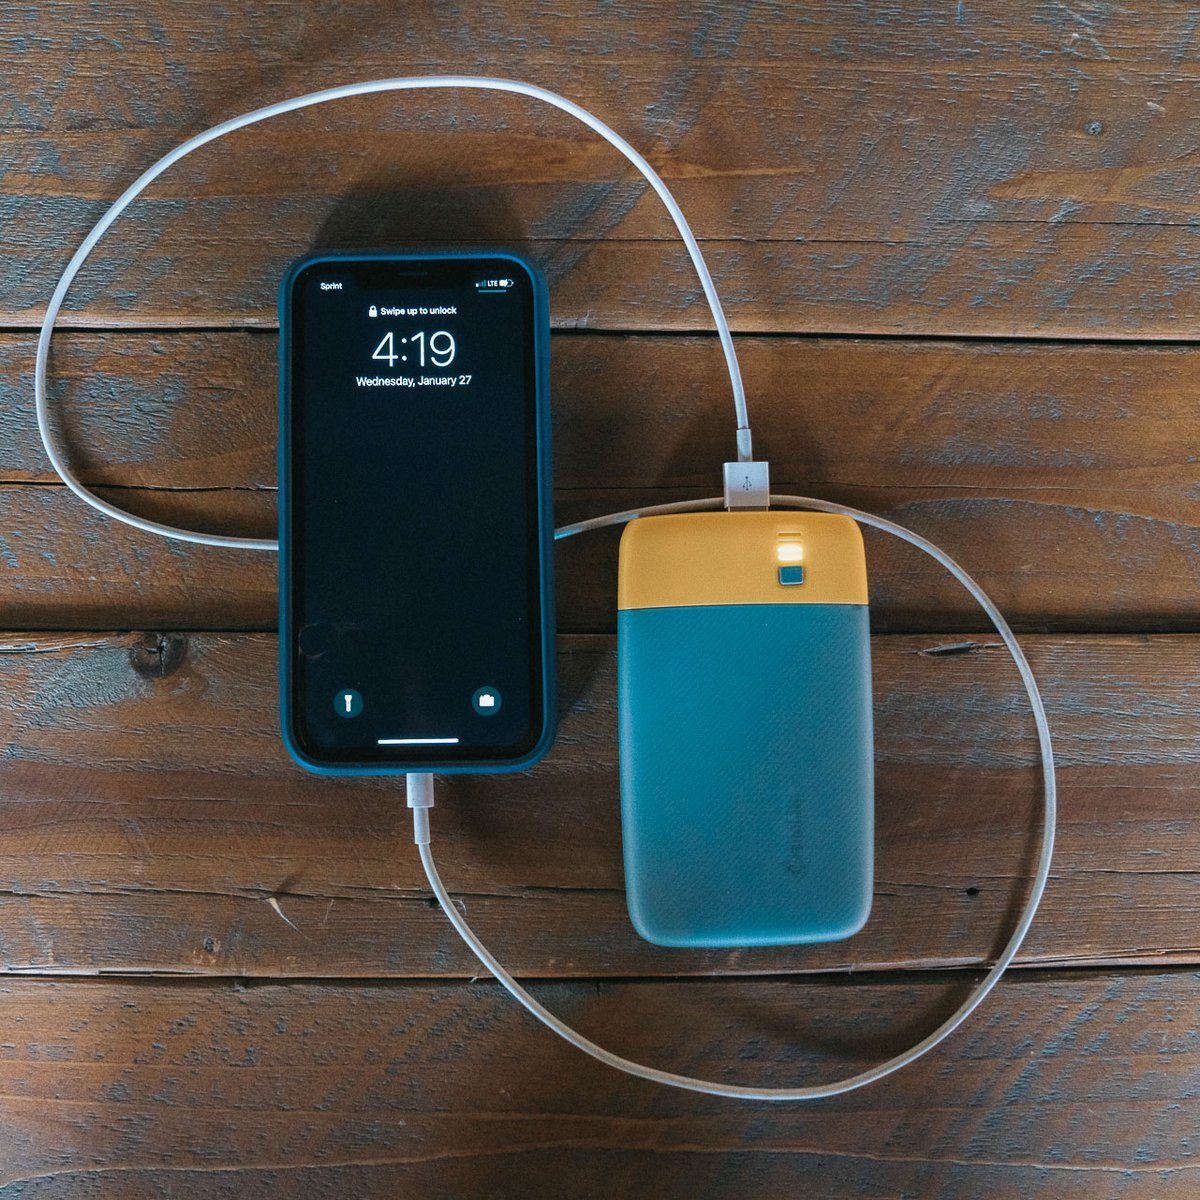 BioLite Charge 20 PD USB Device Charger & Power Pack 